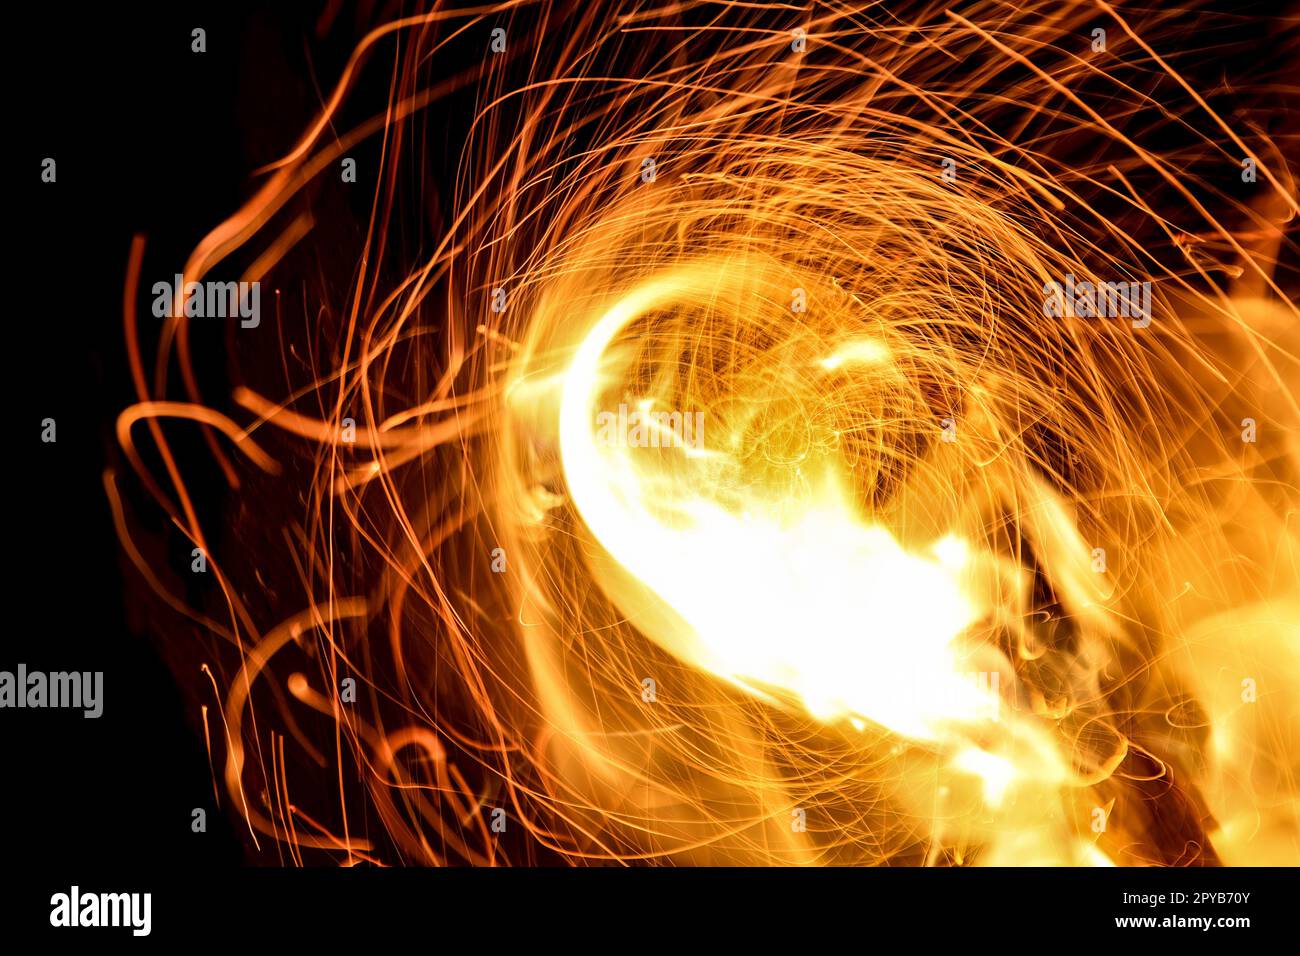 Fire with swirls of sparks in the night Stock Photo